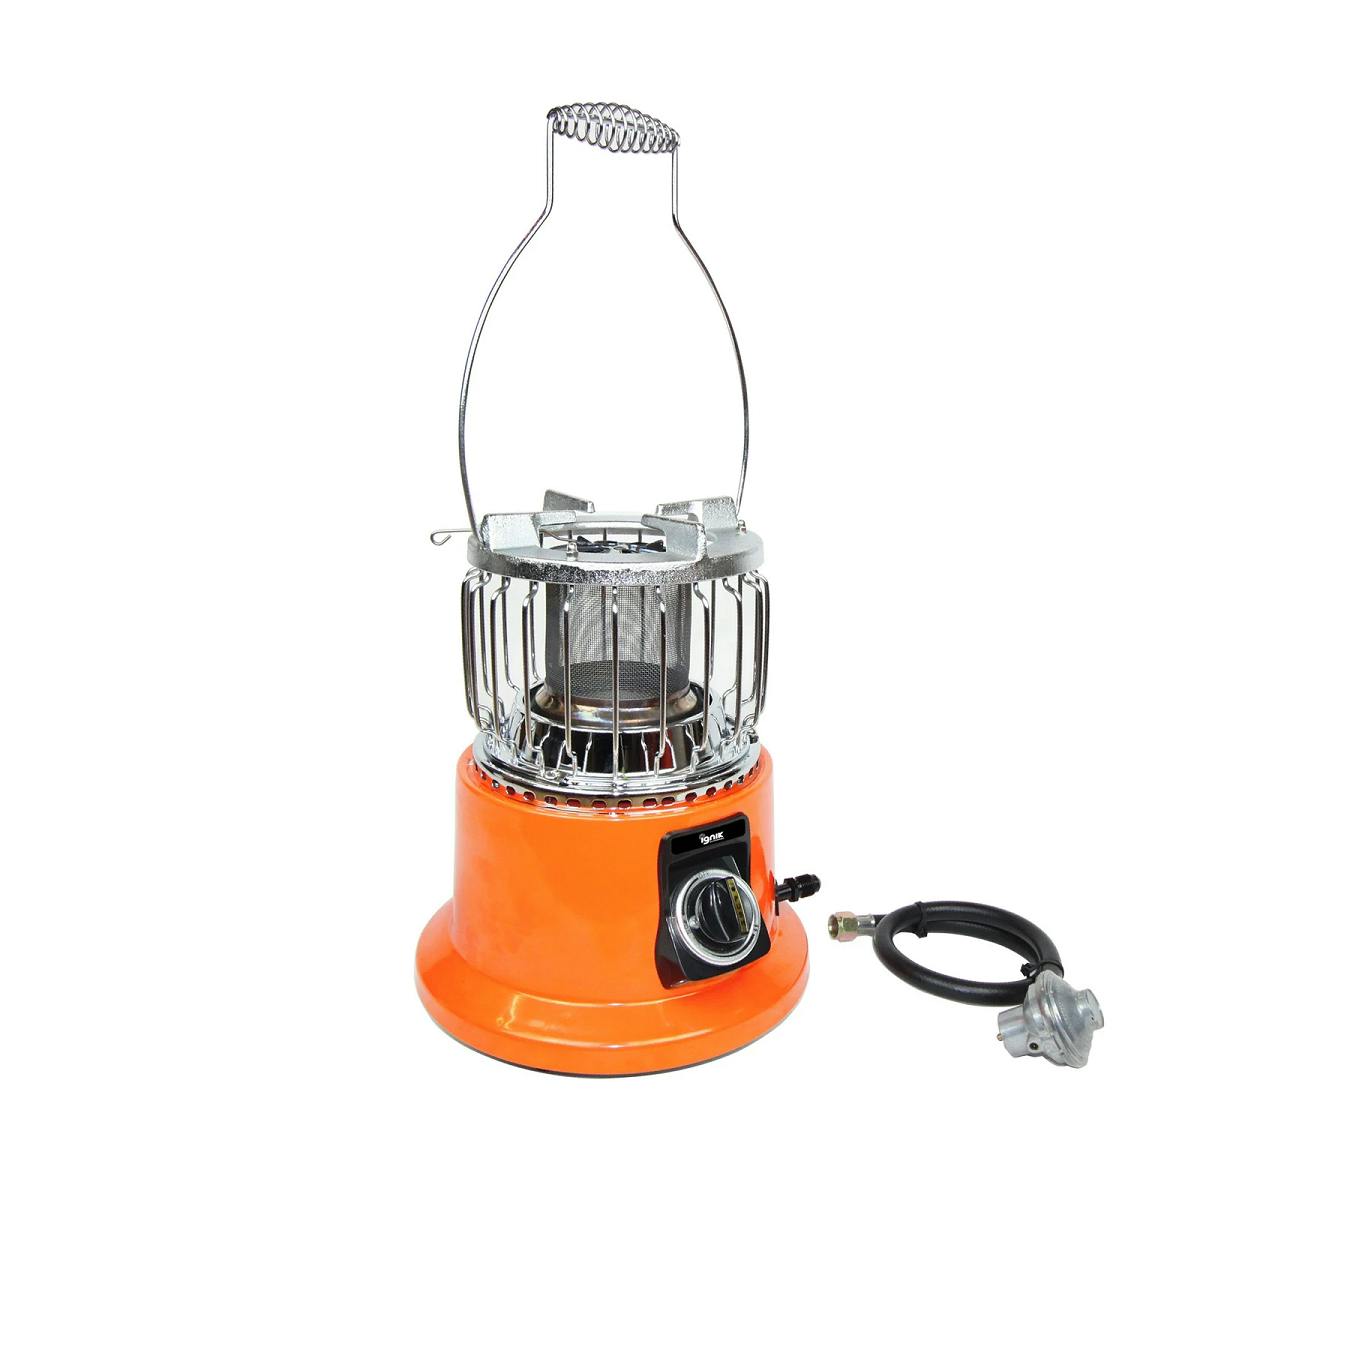 Ignik - 2-IN-1 Heater and Stove